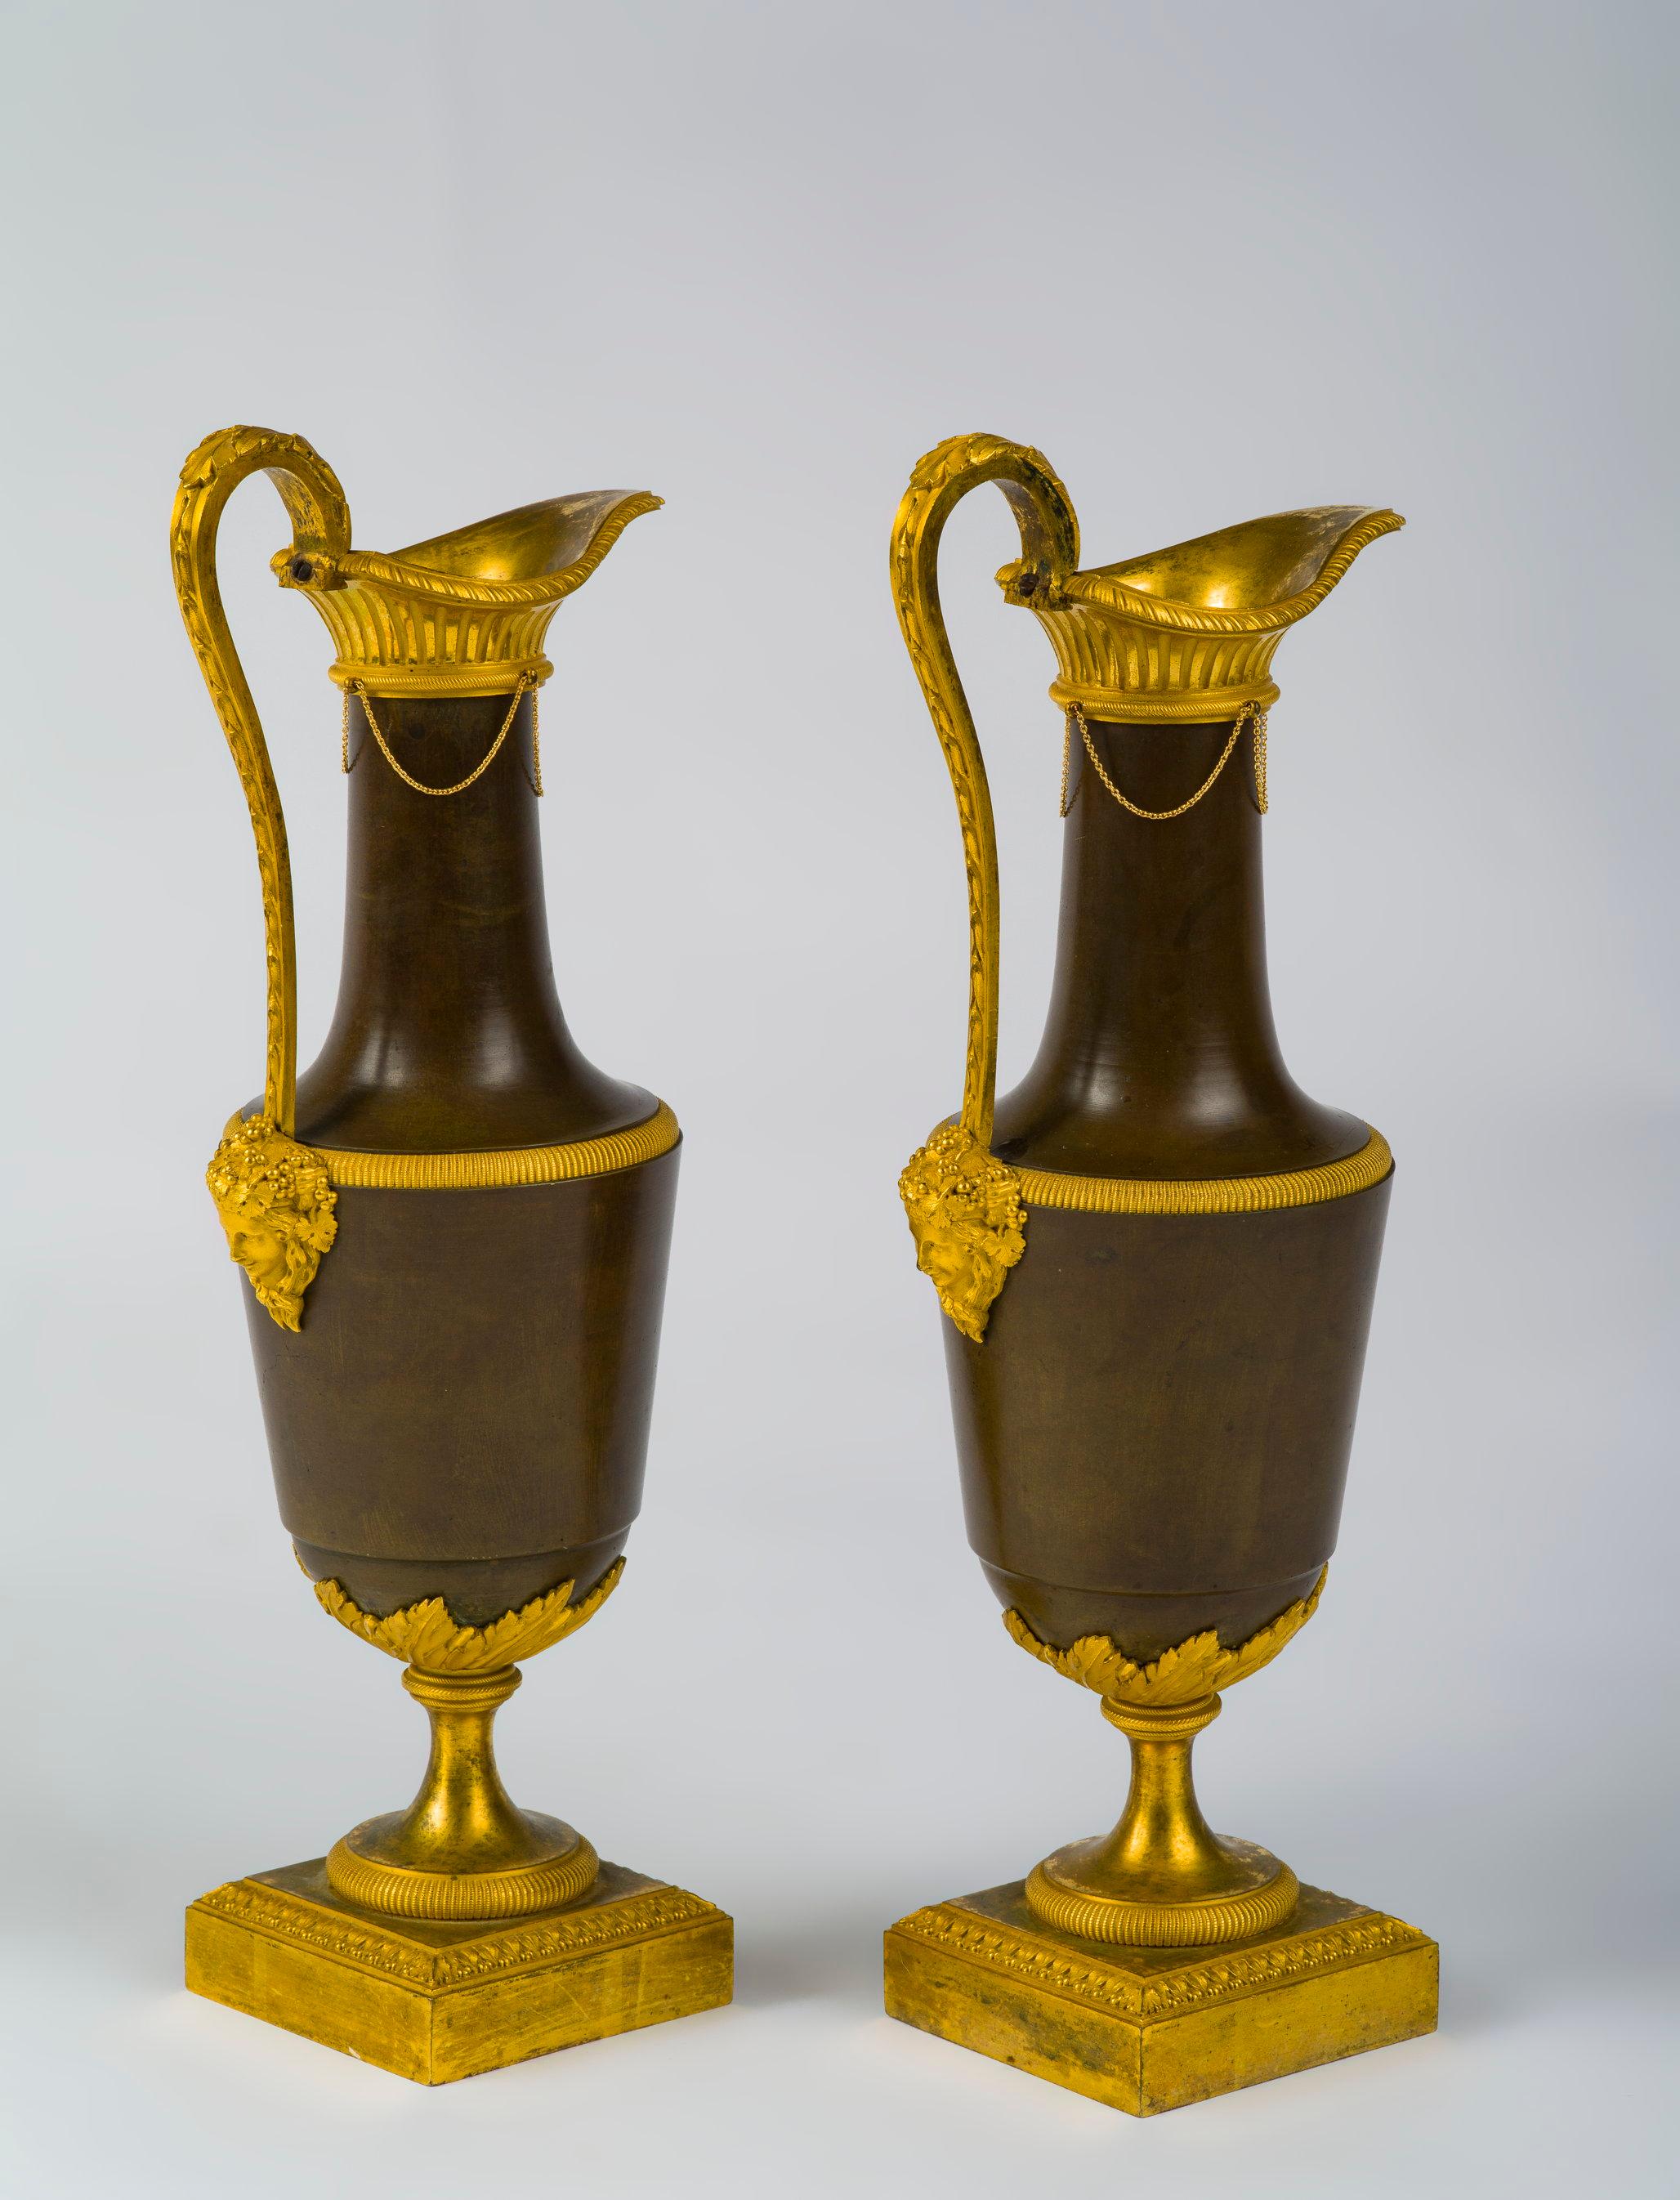 In the neoclassical taste, the open reeded spouts above ovoid bodies with leaf-clasped socles on square bases, the handles terminating in a female mask.

This pair of ewers is a rare early example of a model which became more popular under the